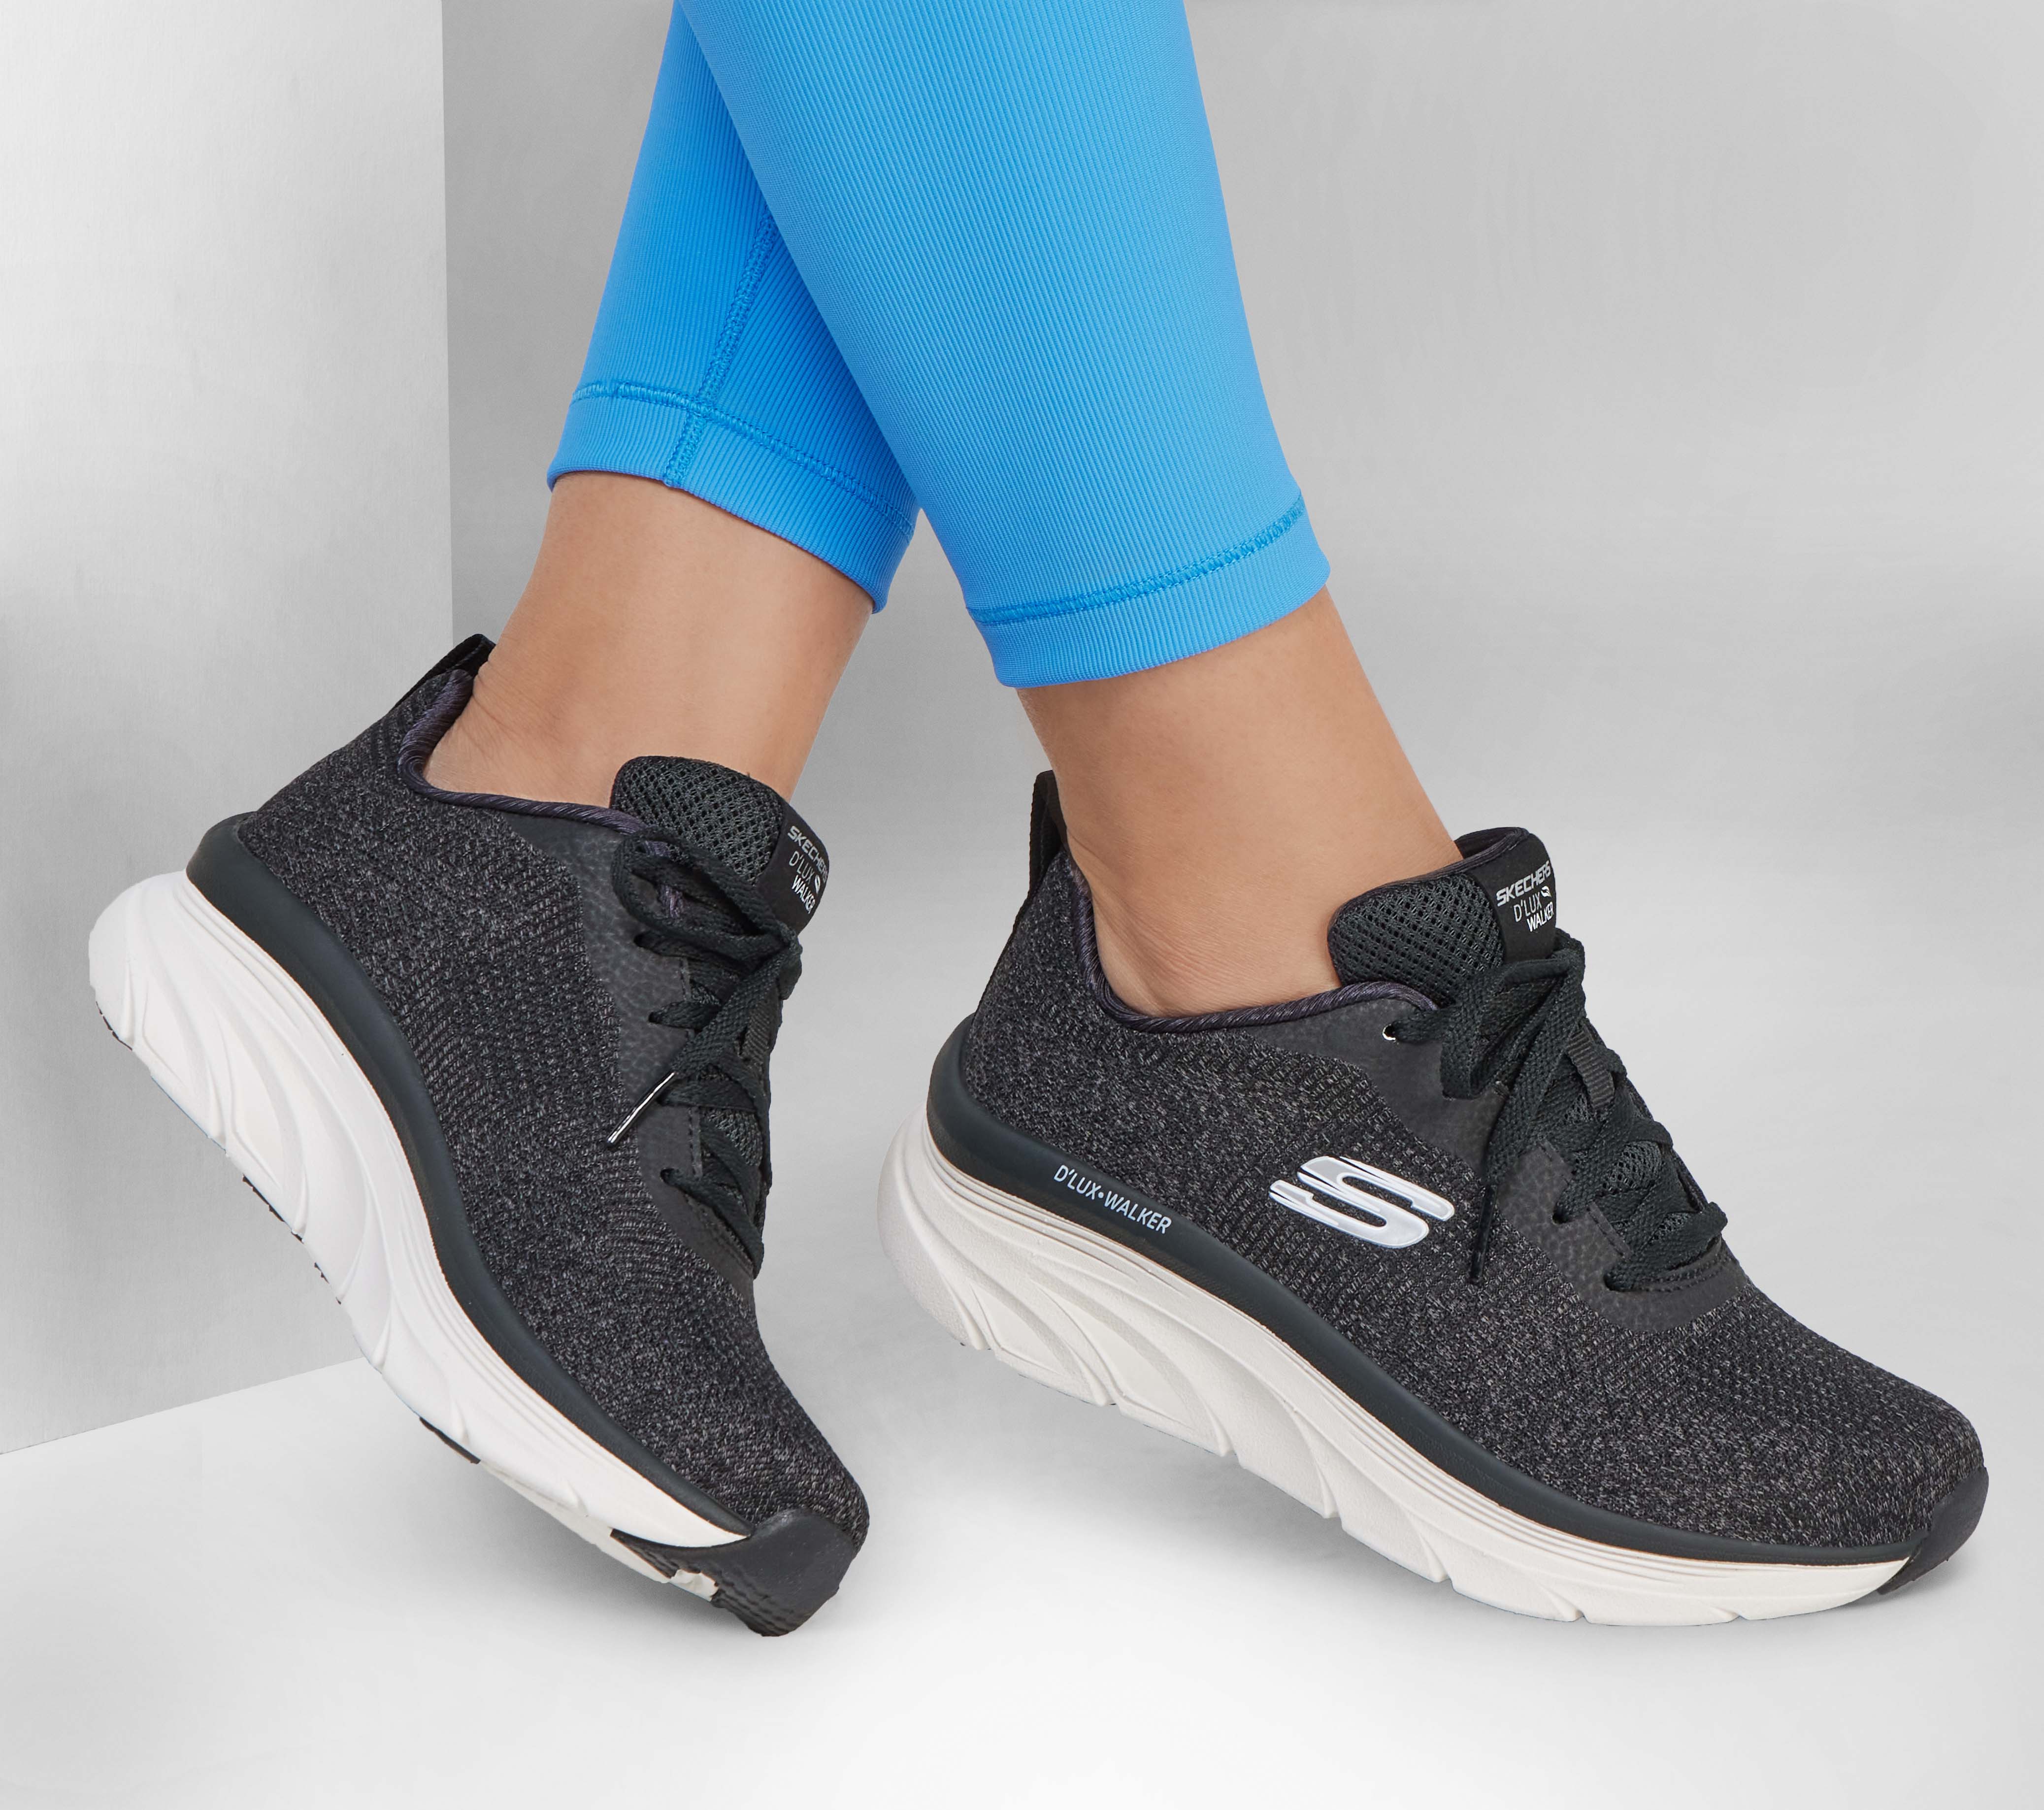 Dinkarville Smag bjerg Relaxed Fit: D'Lux Walker - Daily Beauty | SKECHERS